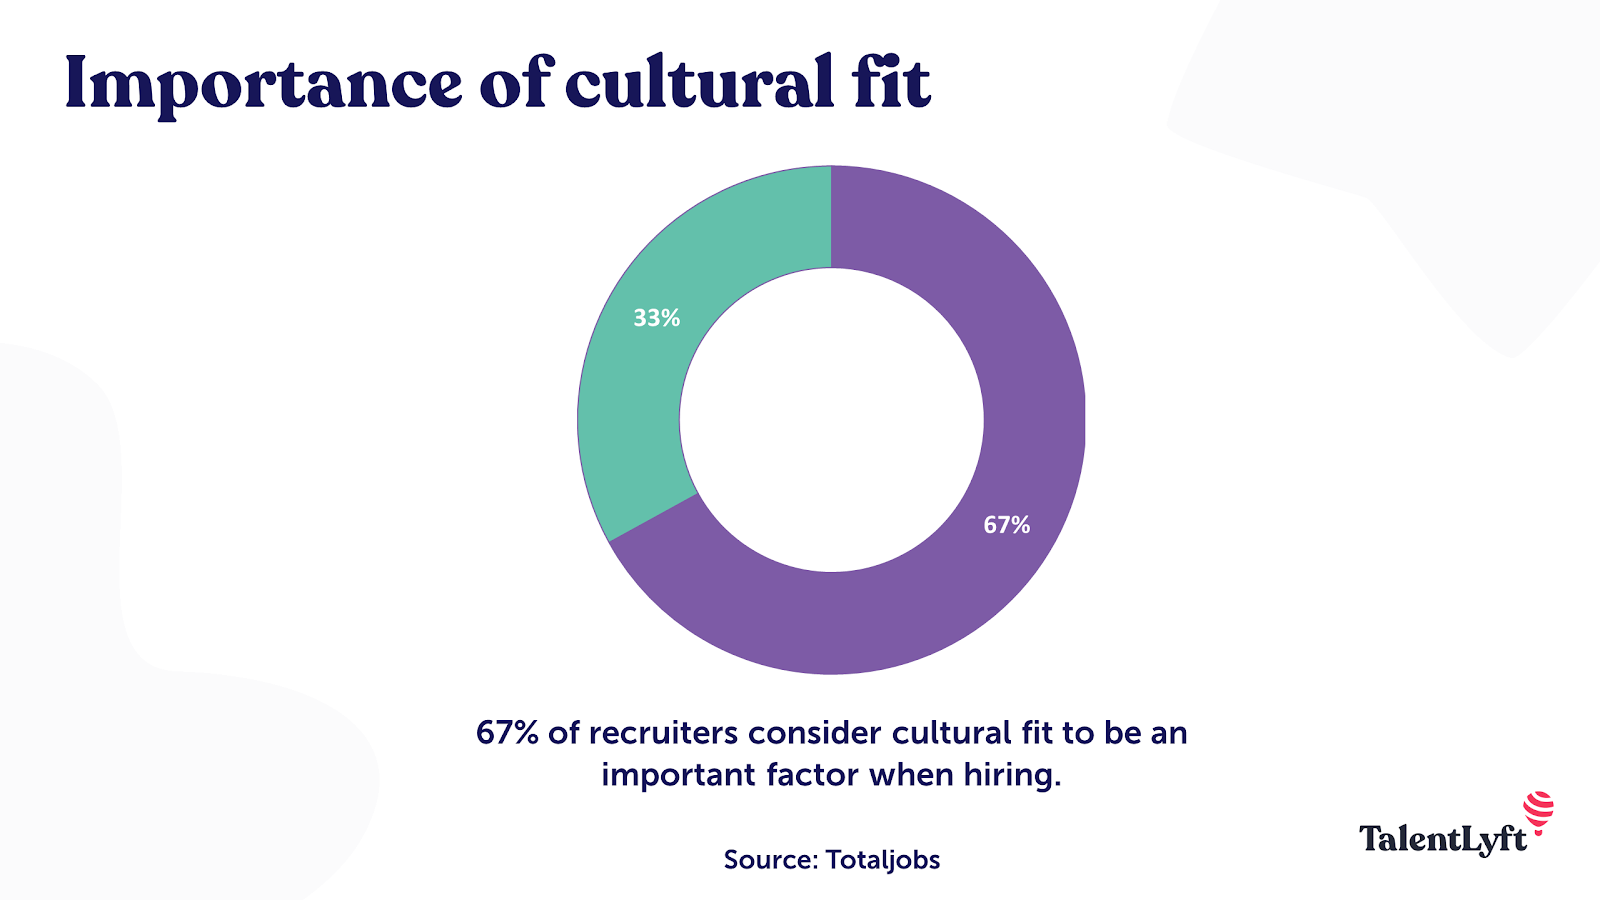 HR content strategy helps find and retain cultural fit